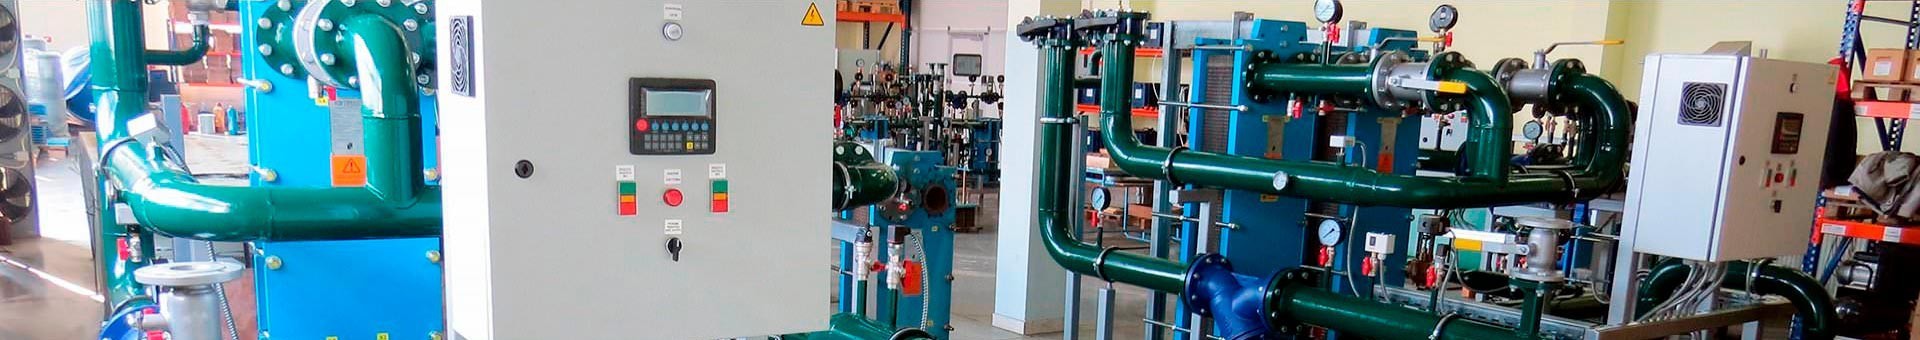 How to achieve a high density of valves  The solution has been found